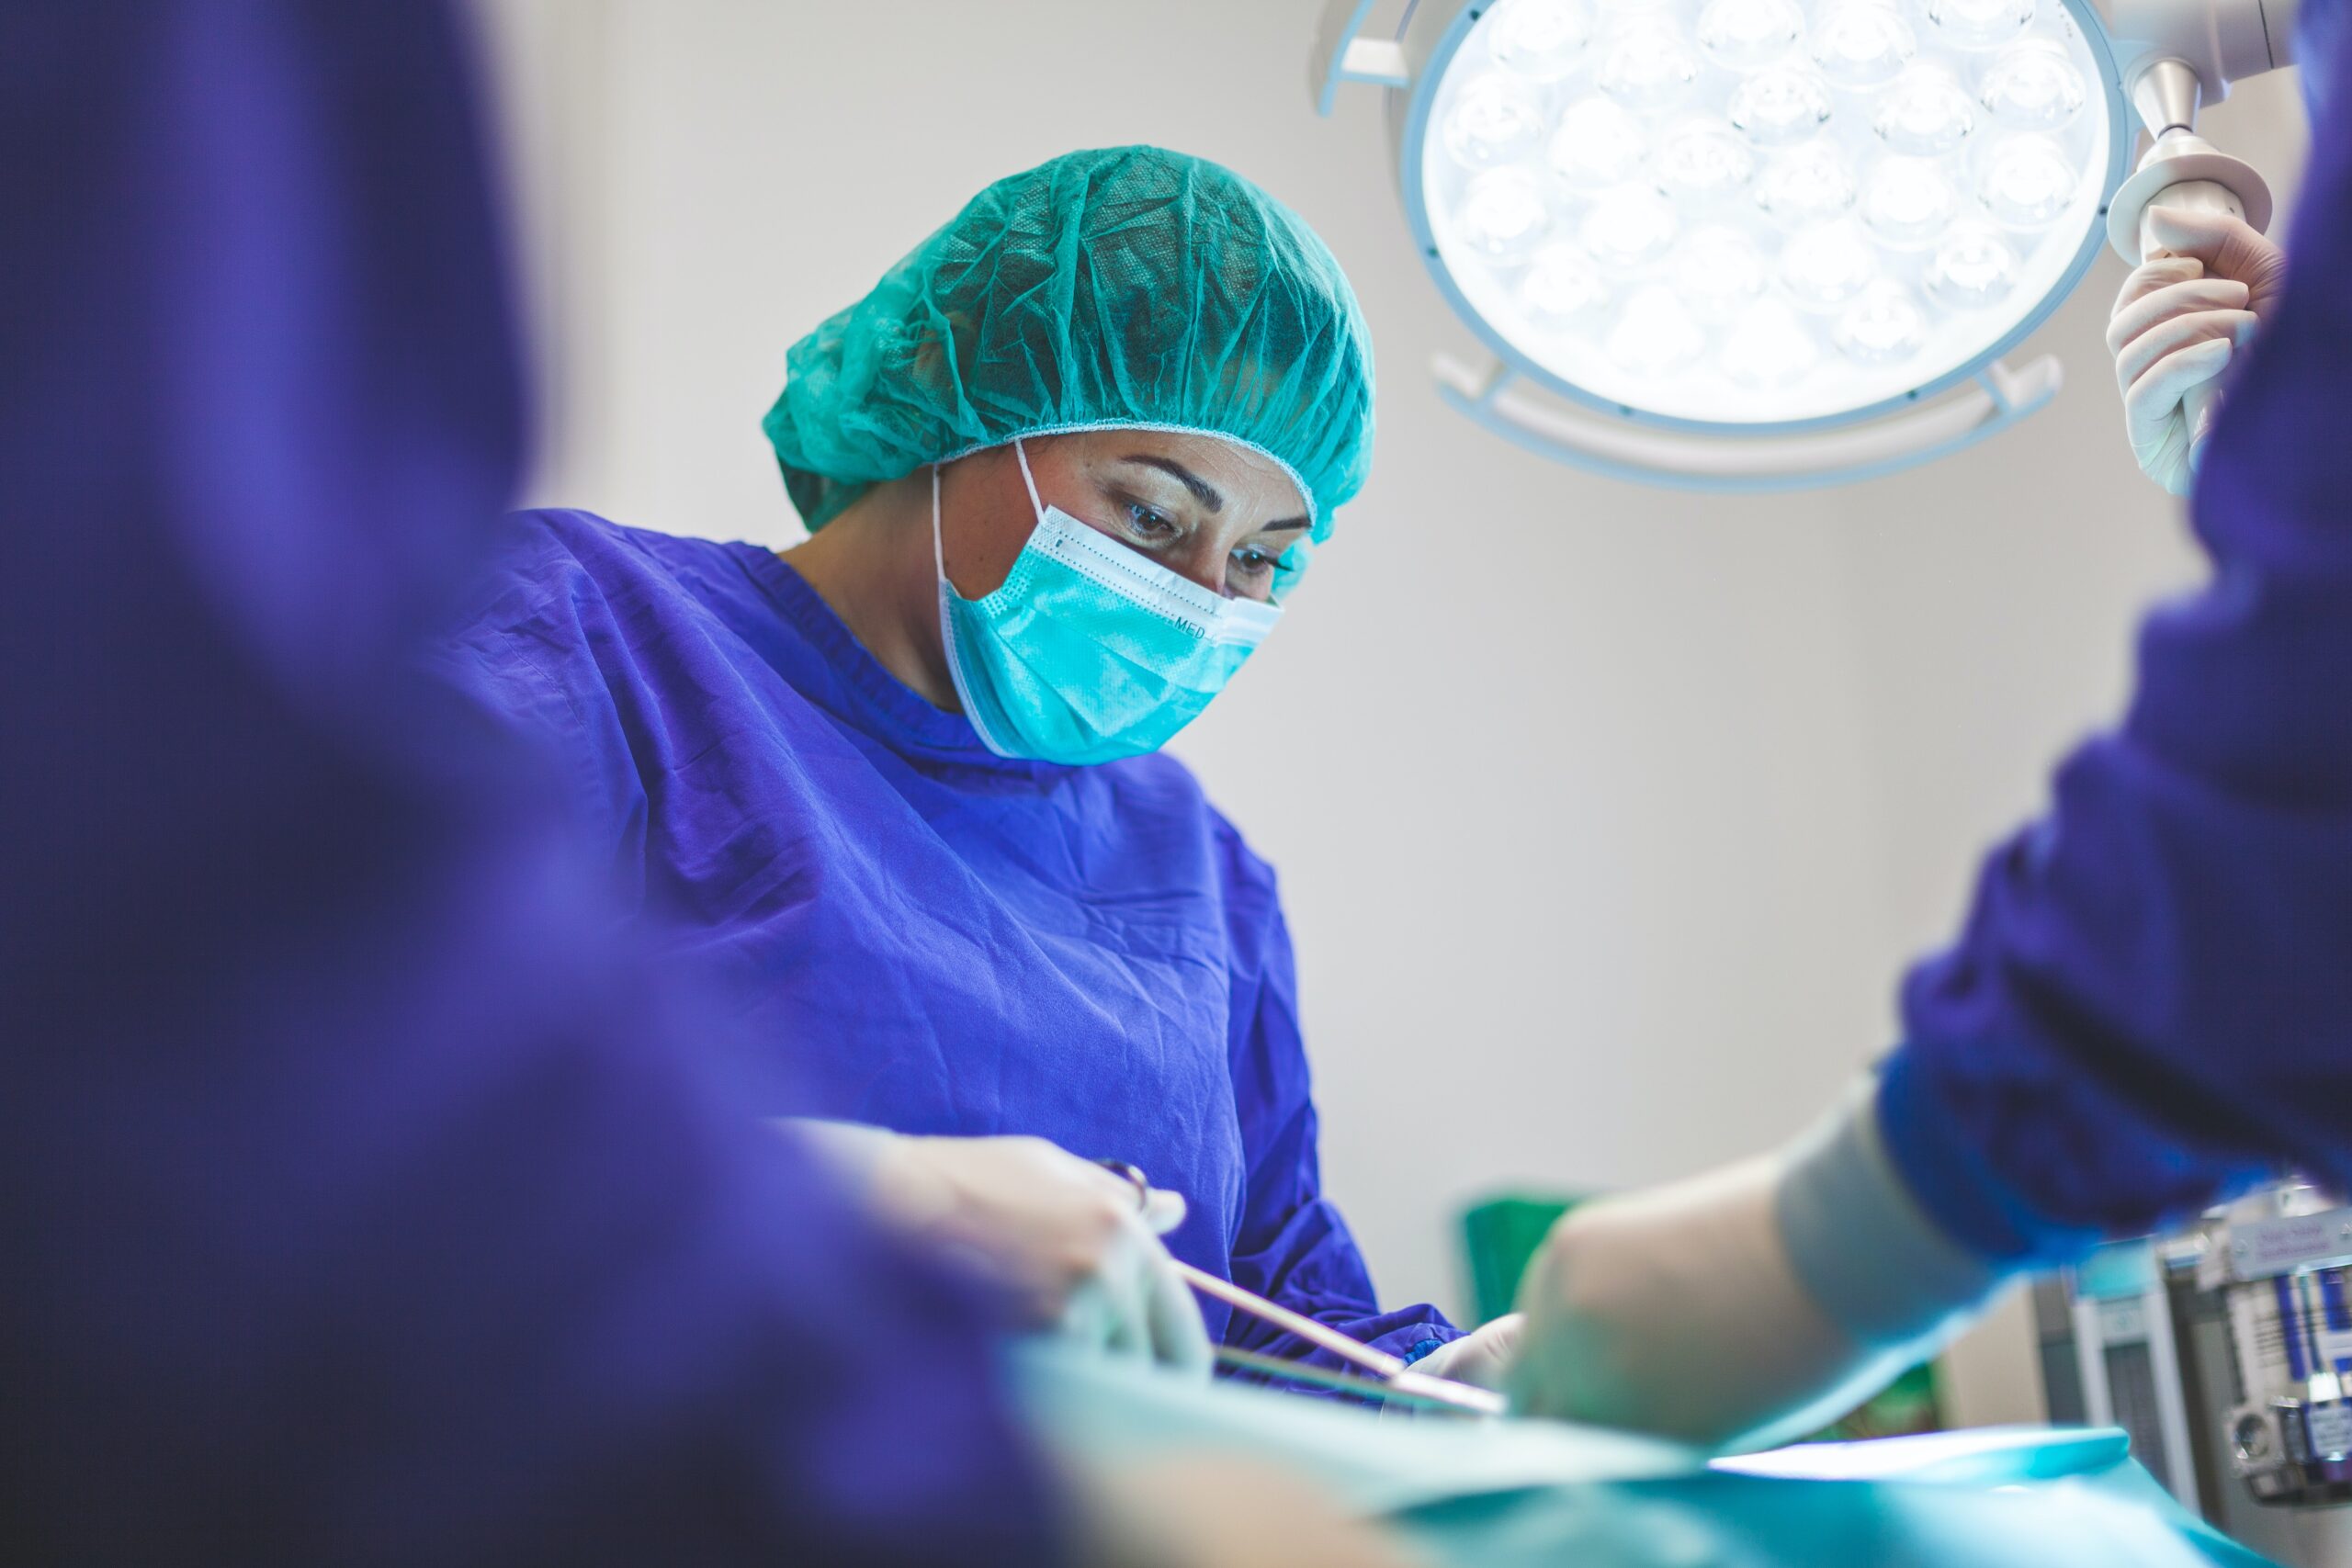 Cosmetic surgery industry back under the knife - Article One